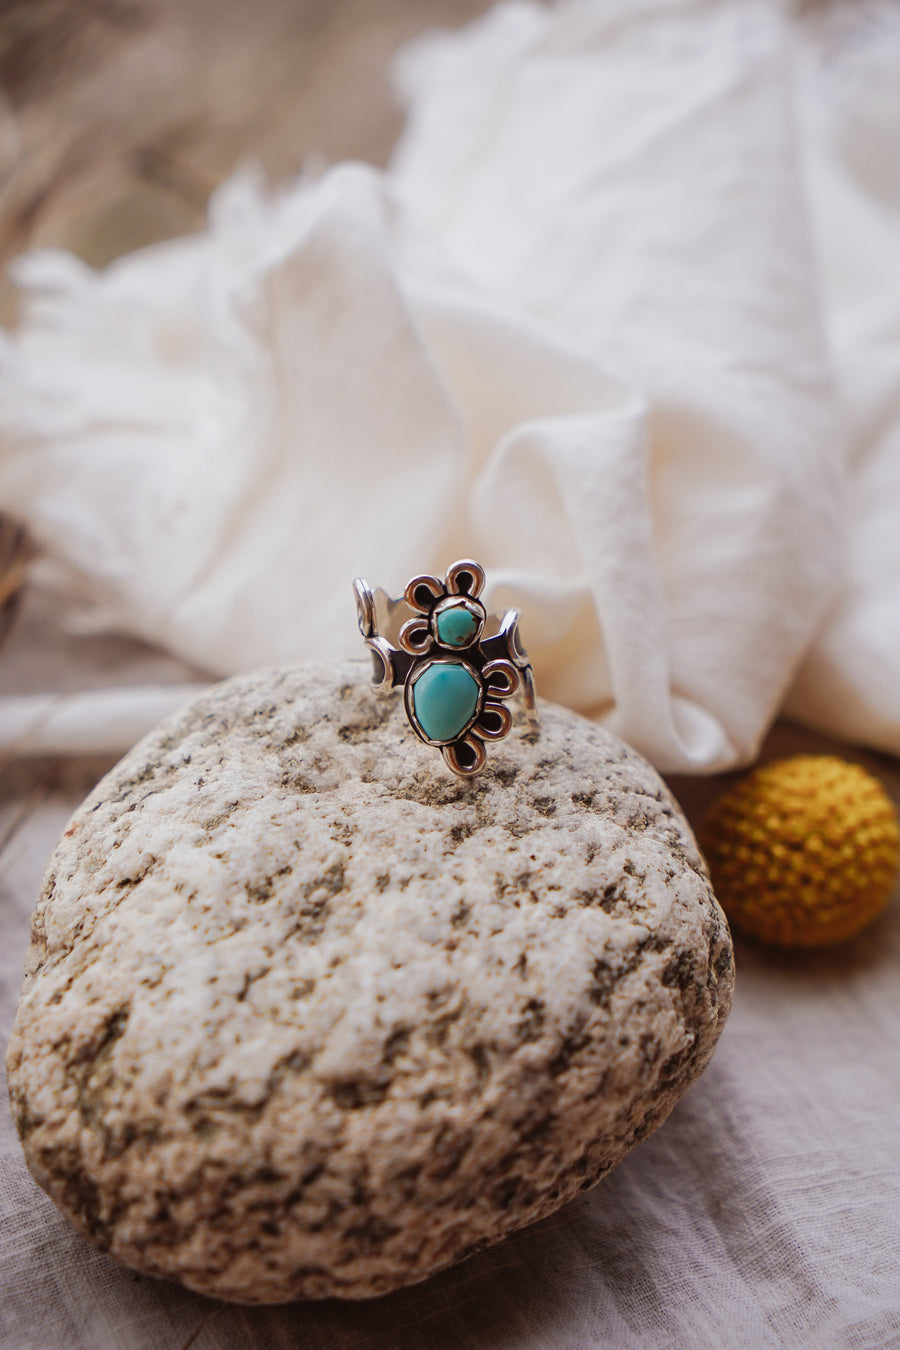 The Whimsy Ring in Sierra Nevada Turquoise (Size 7)